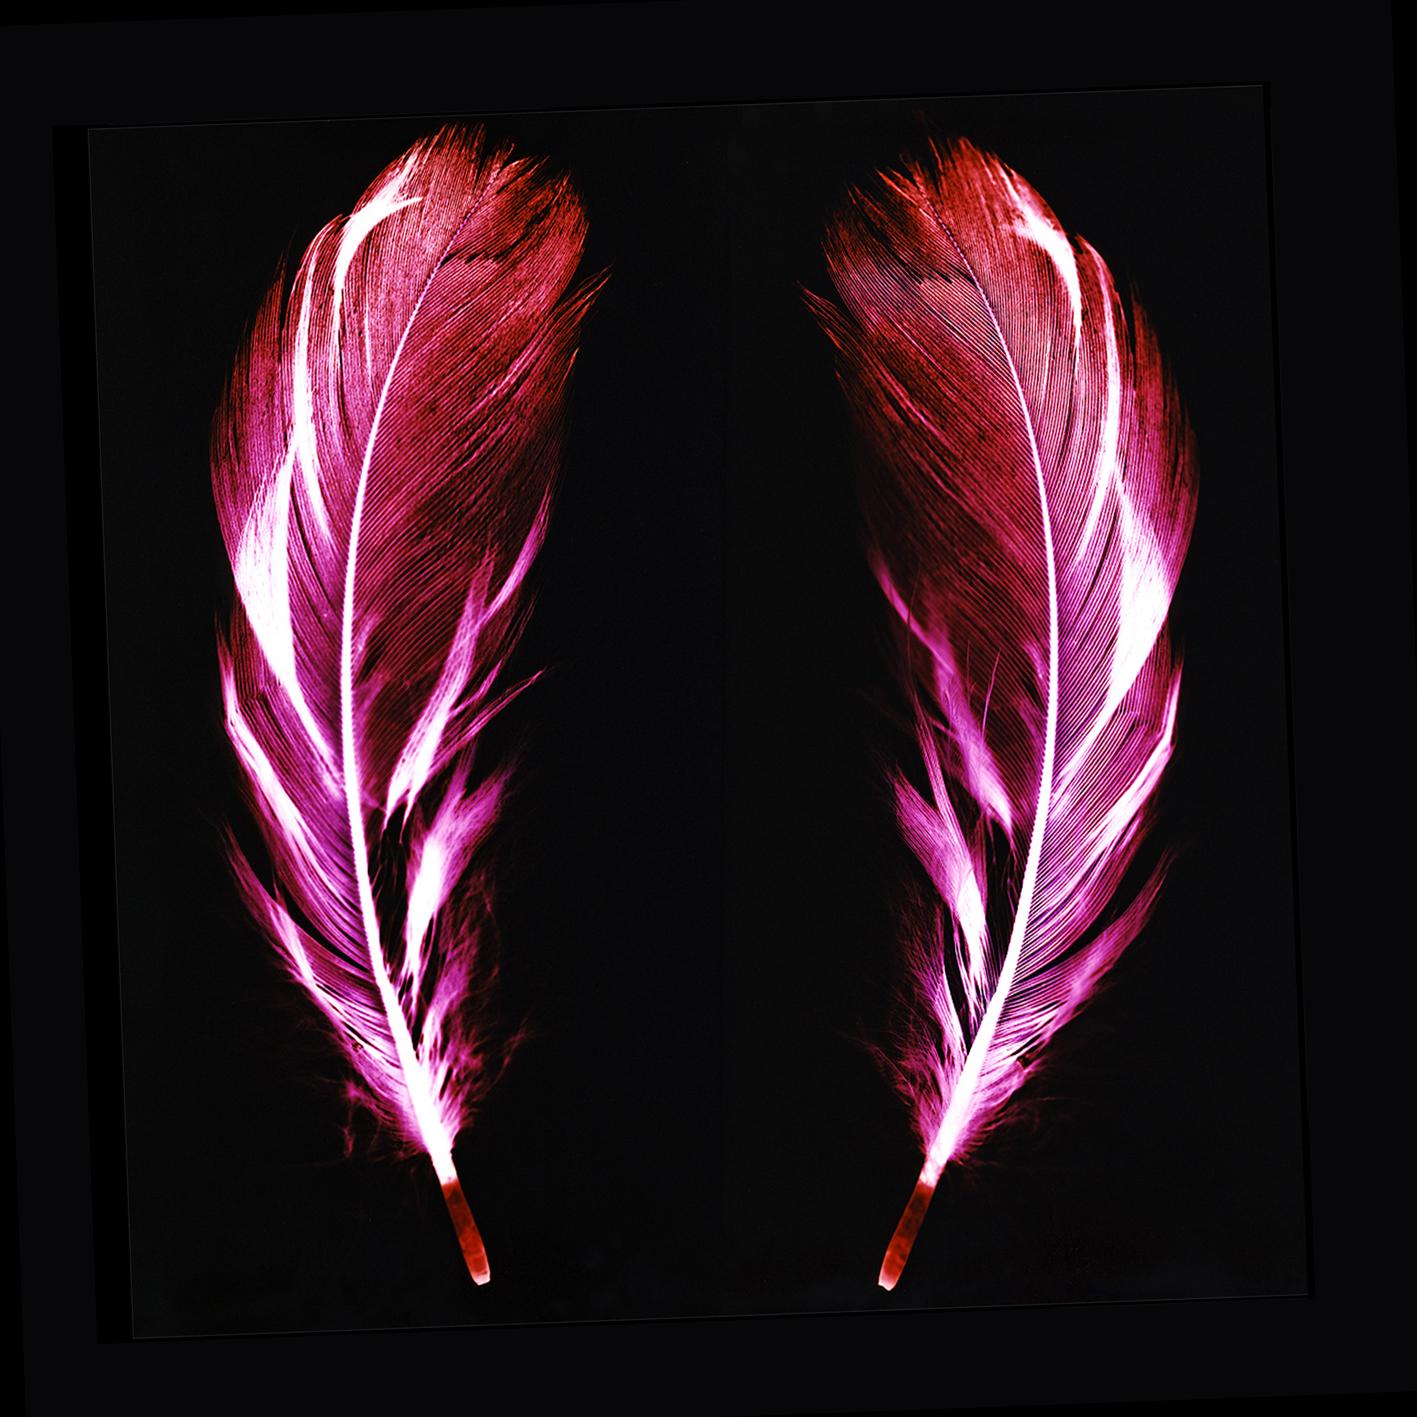 Flight of Fancy - Electric Pink Feathers - Conceptual, Color Photography